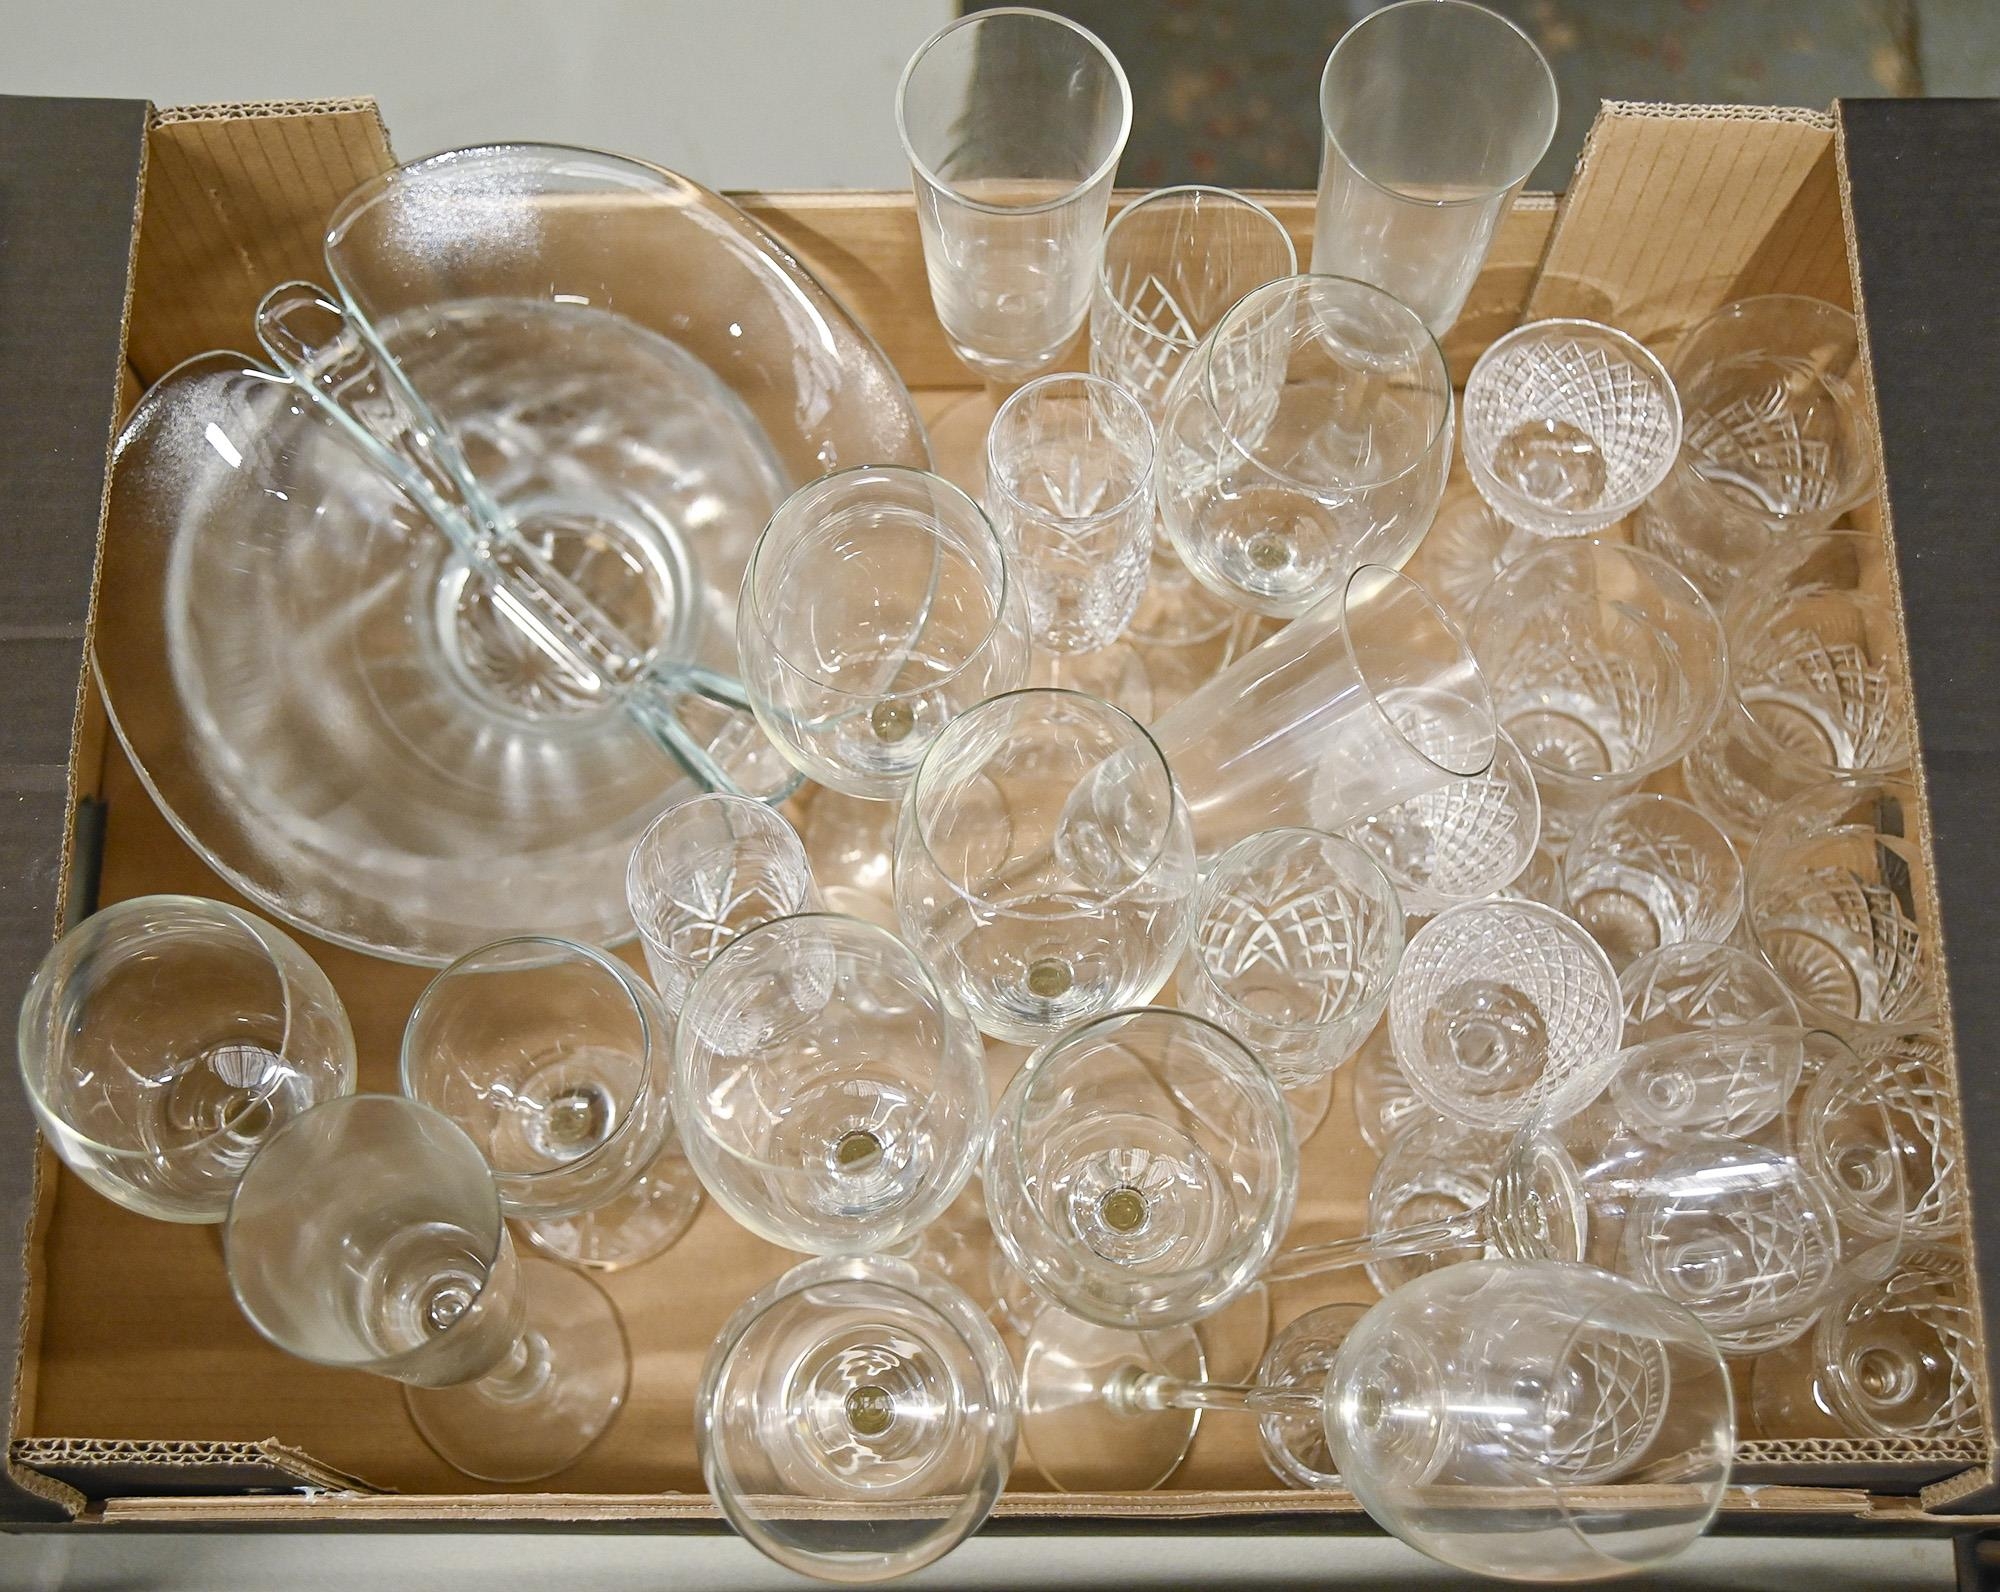 Miscellaneous glassware, including cut glass and other decanters, demijohns, vases, drinking - Image 2 of 4